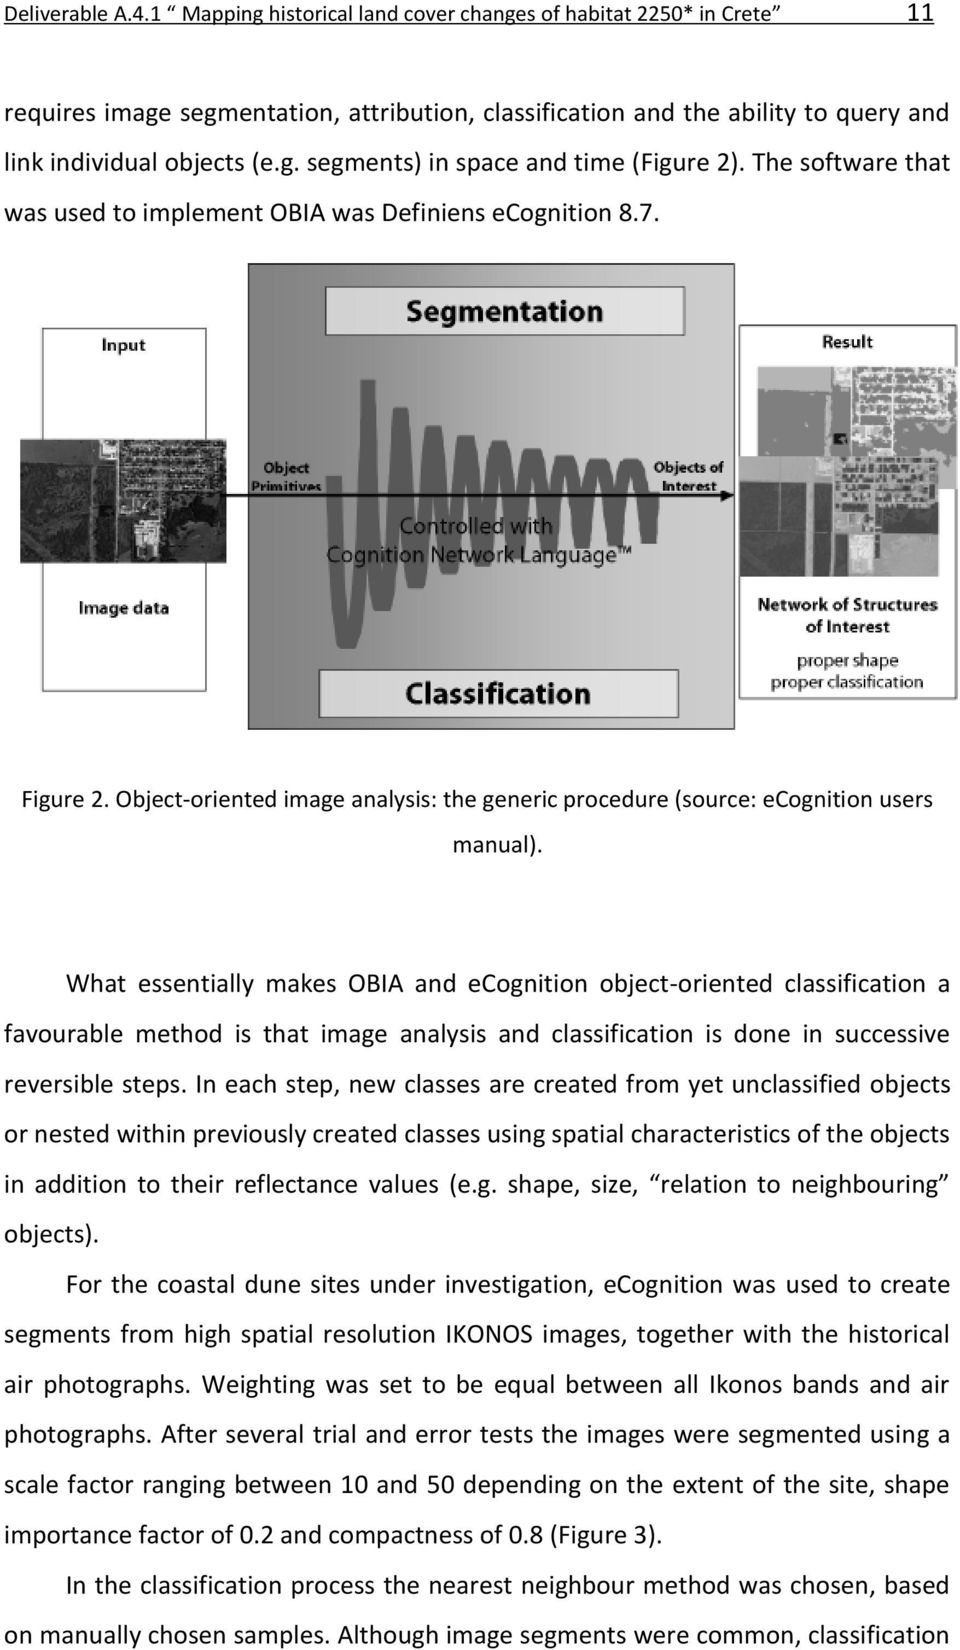 What essentially makes OBIA and ecognition object-oriented classification a favourable method is that image analysis and classification is done in successive reversible steps.